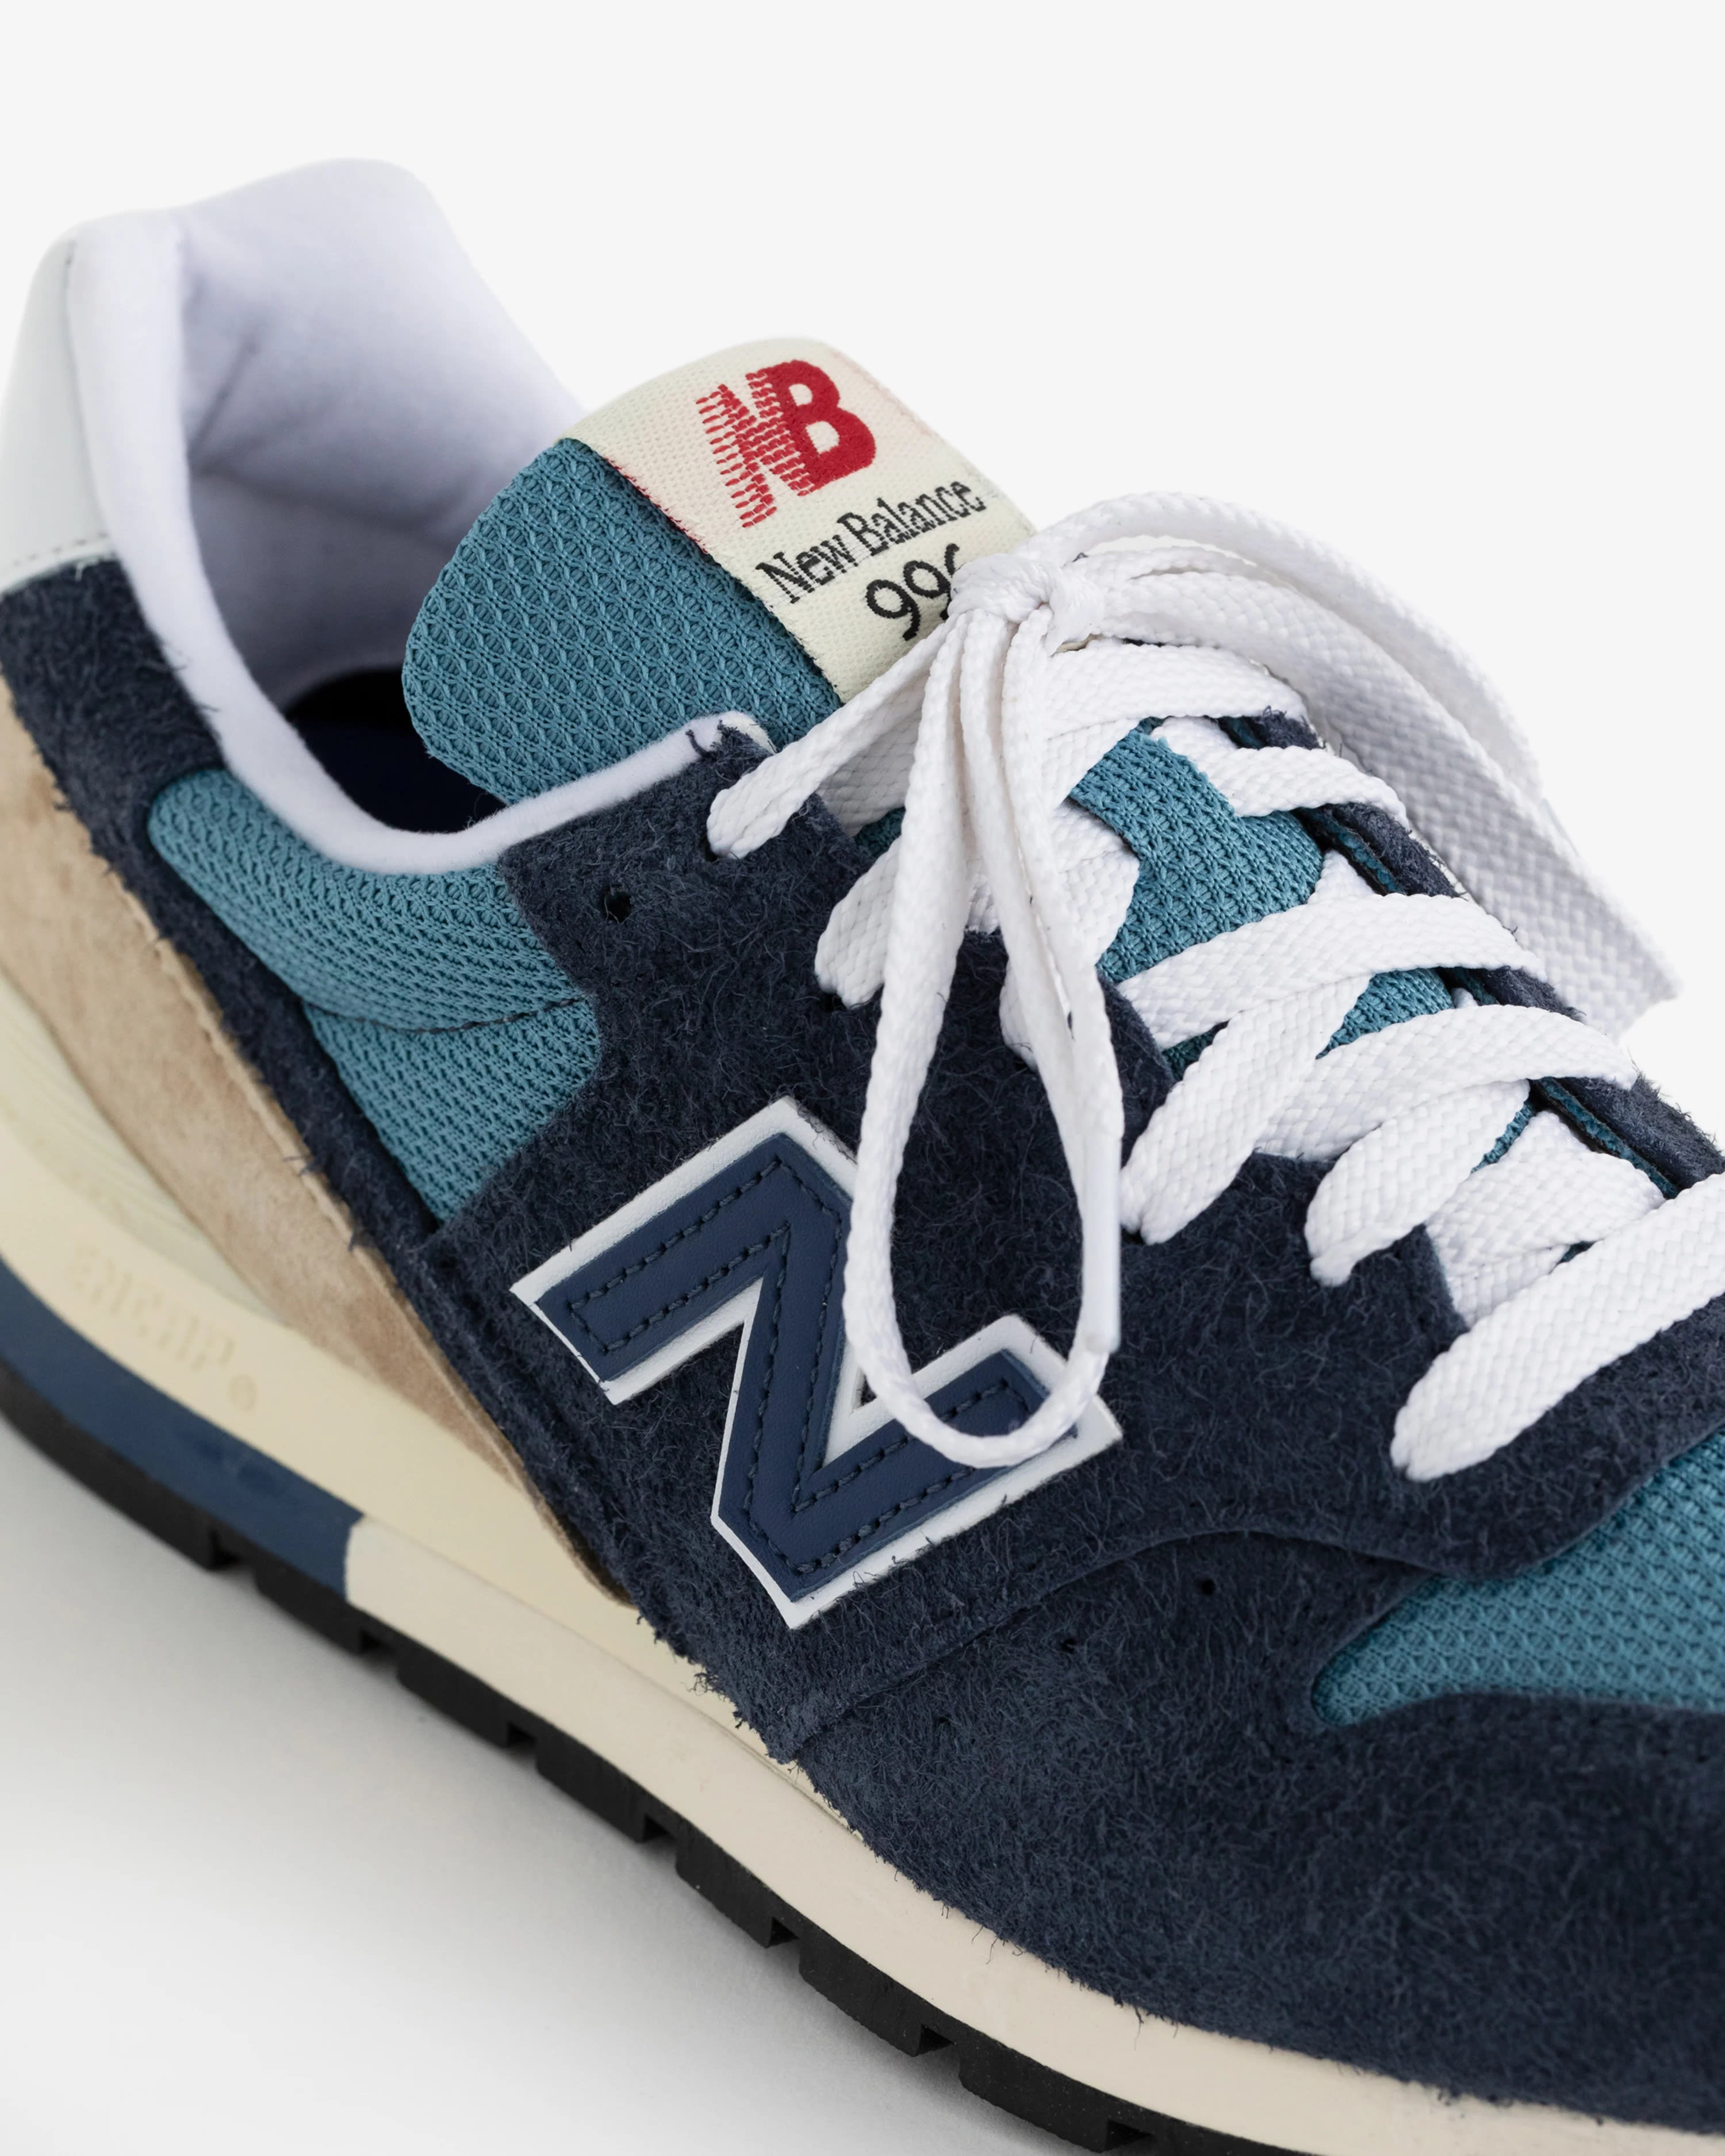 New Balance shoe pictured